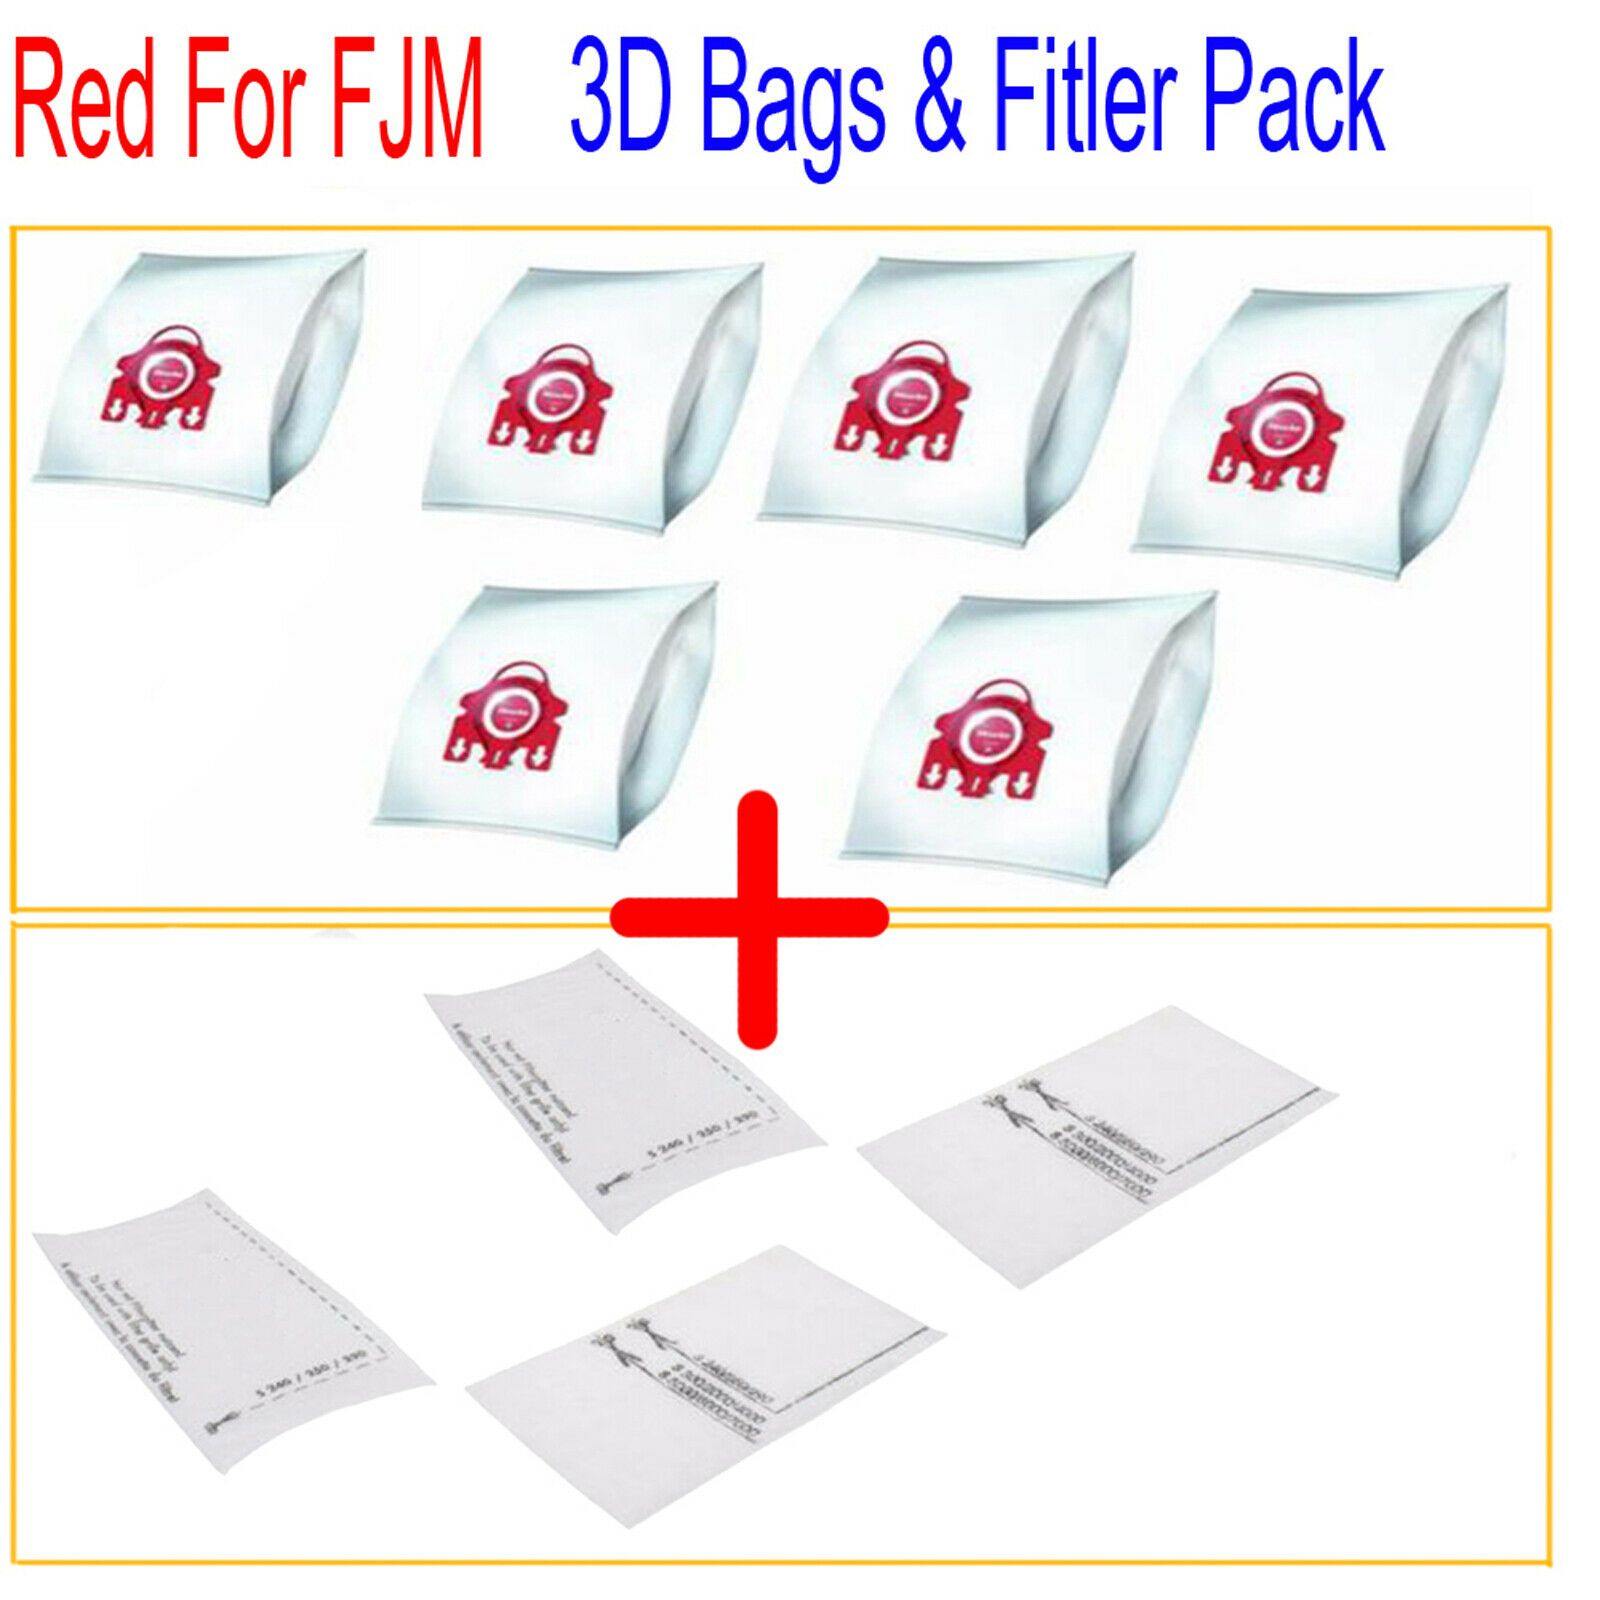 6X Vacuum Cleaner Bags For Miele FJM S710-1 S711-1 S712-1 S714 S714-1 Sparesbarn